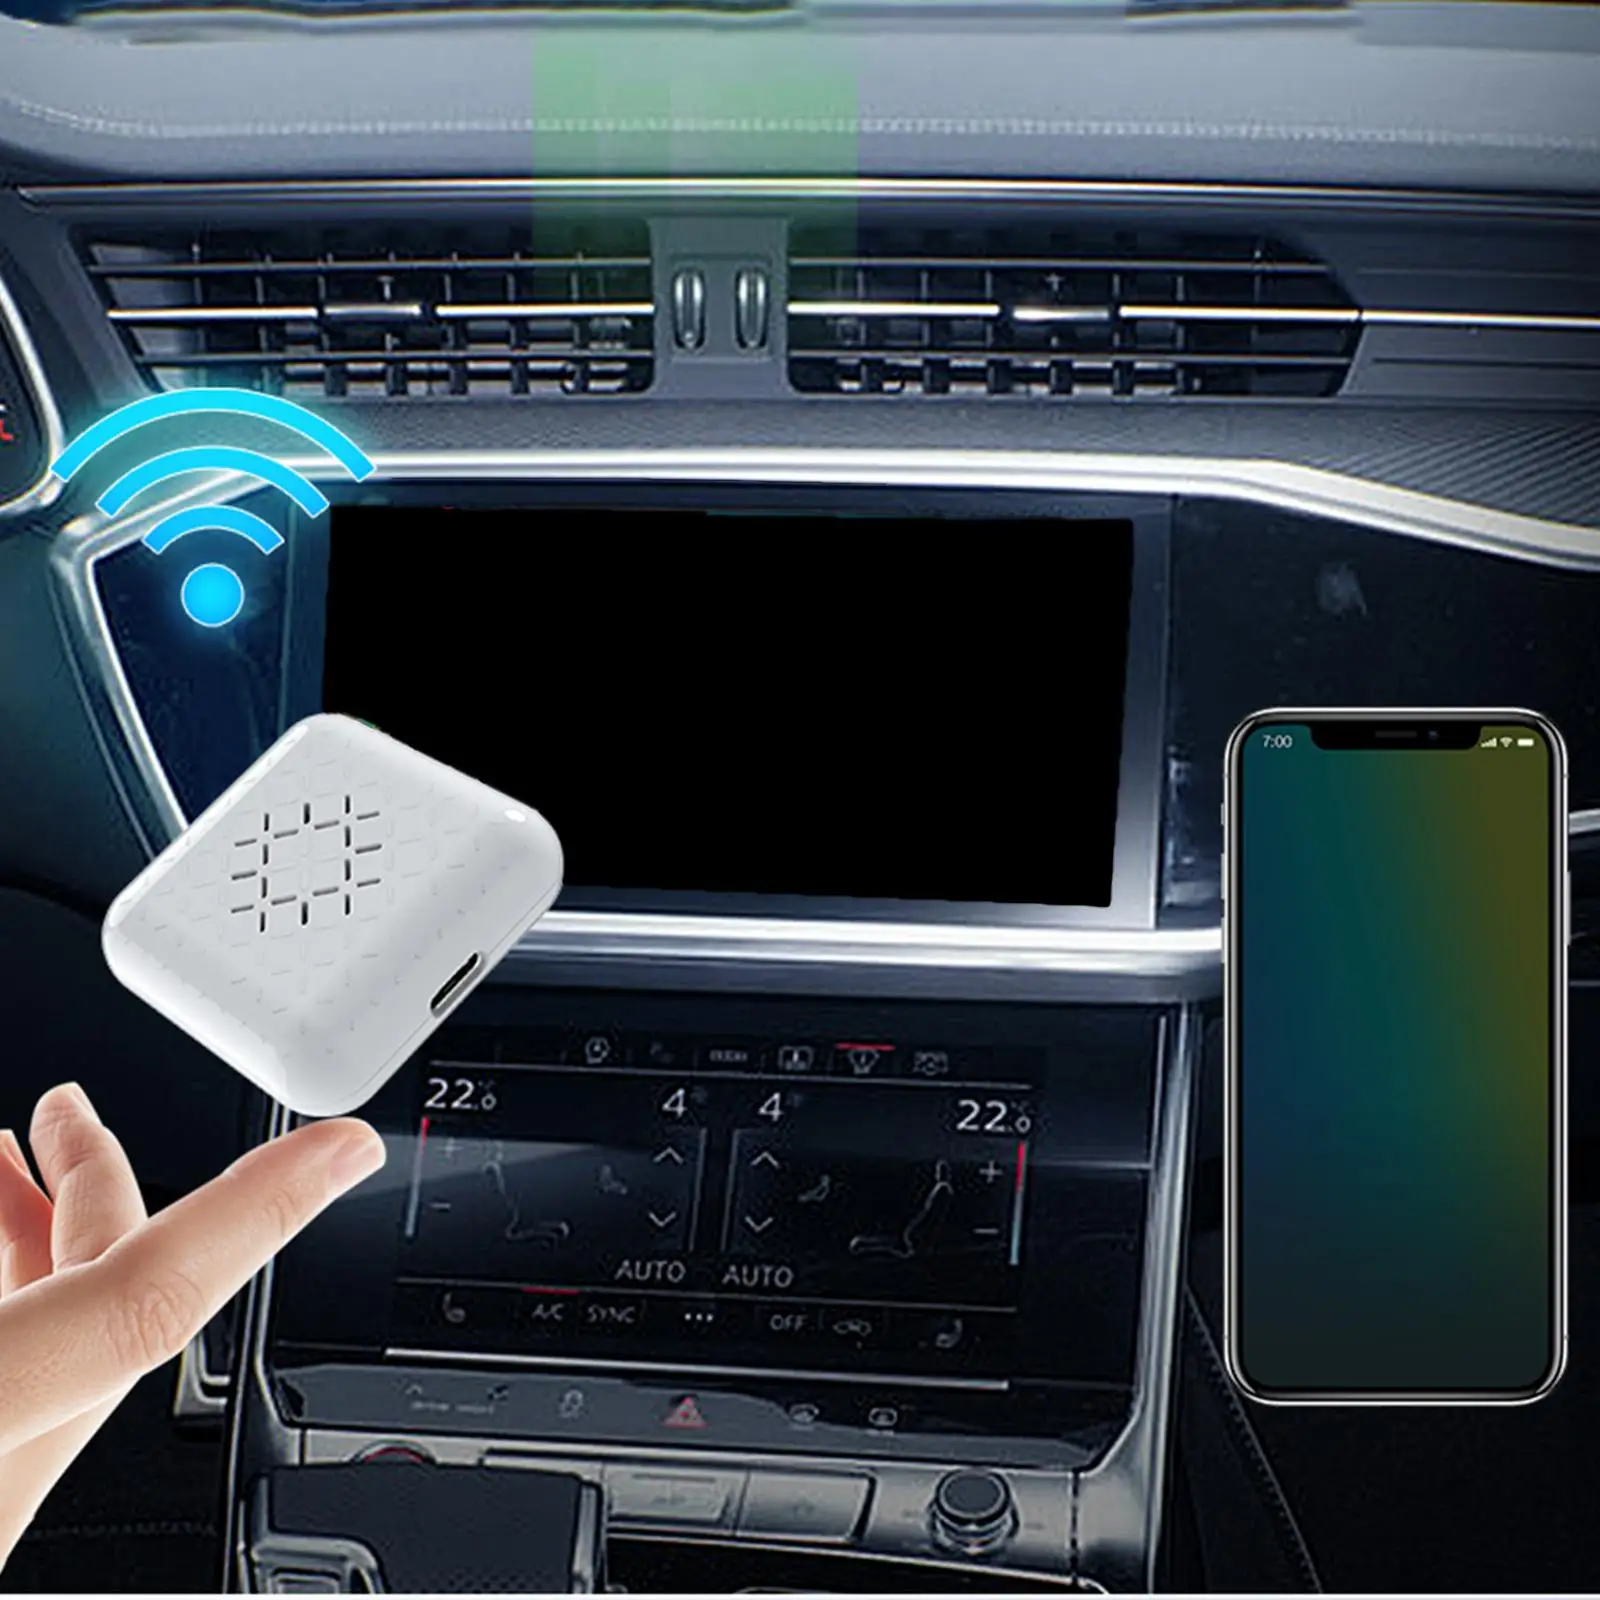 Wireless Car Play Adapter, Support Siri Plug and Play Auto Connect Online Update 5G WiFi Dongle for Cars with Car Play Function